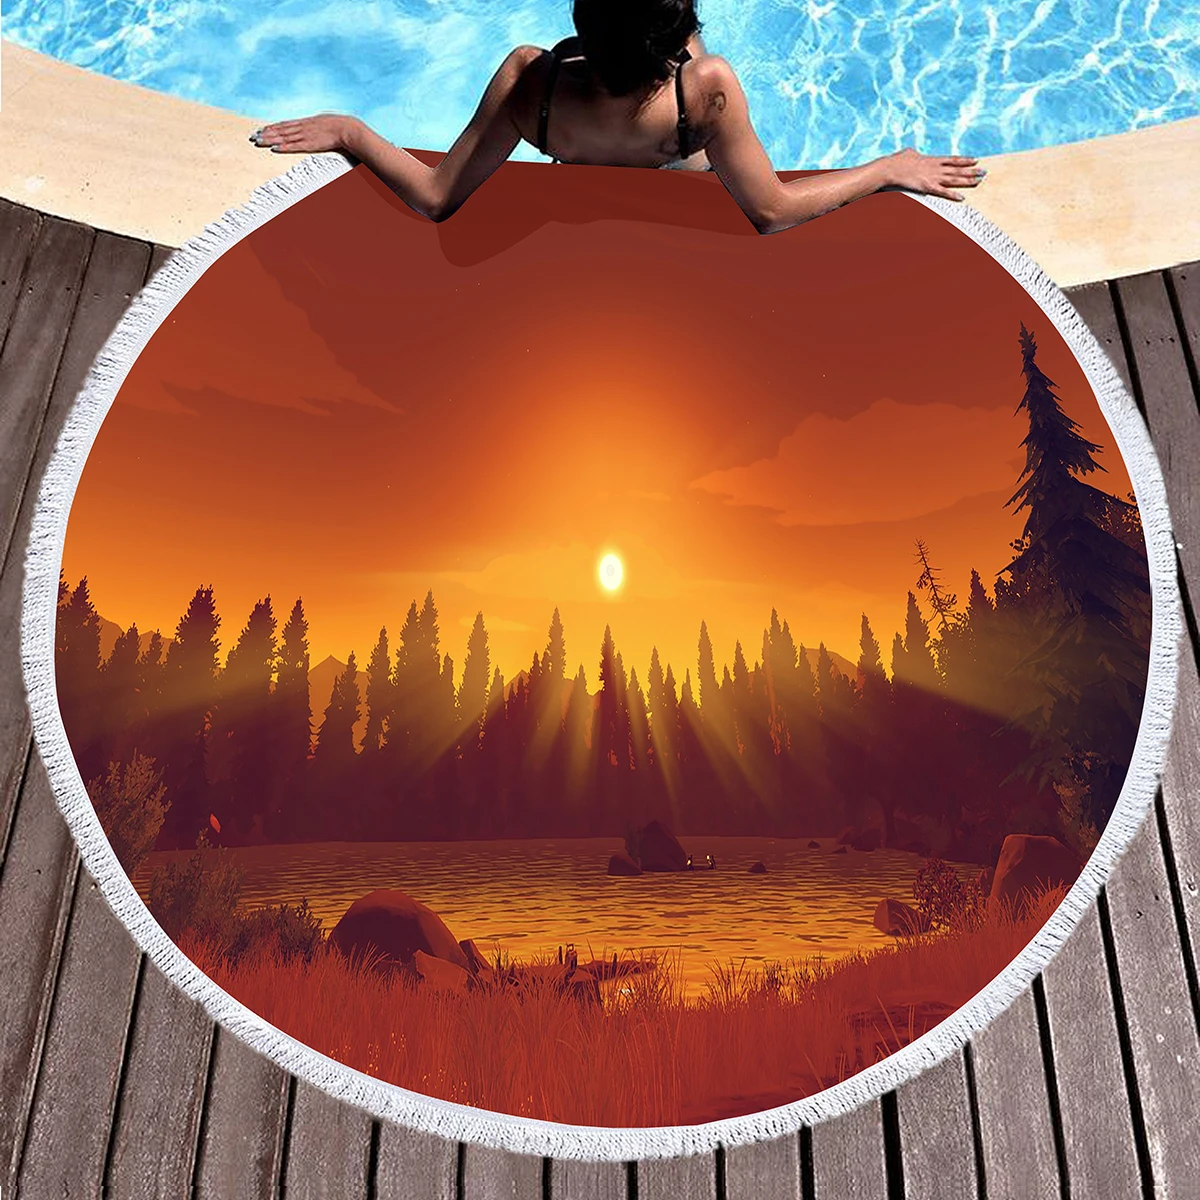 

Round Beach Towel,Sunrise Scenery Art Polyester Sand Resistant Shawl Beach Blanket,Absorbent Quick Dry Pool Towel Picnic Mat